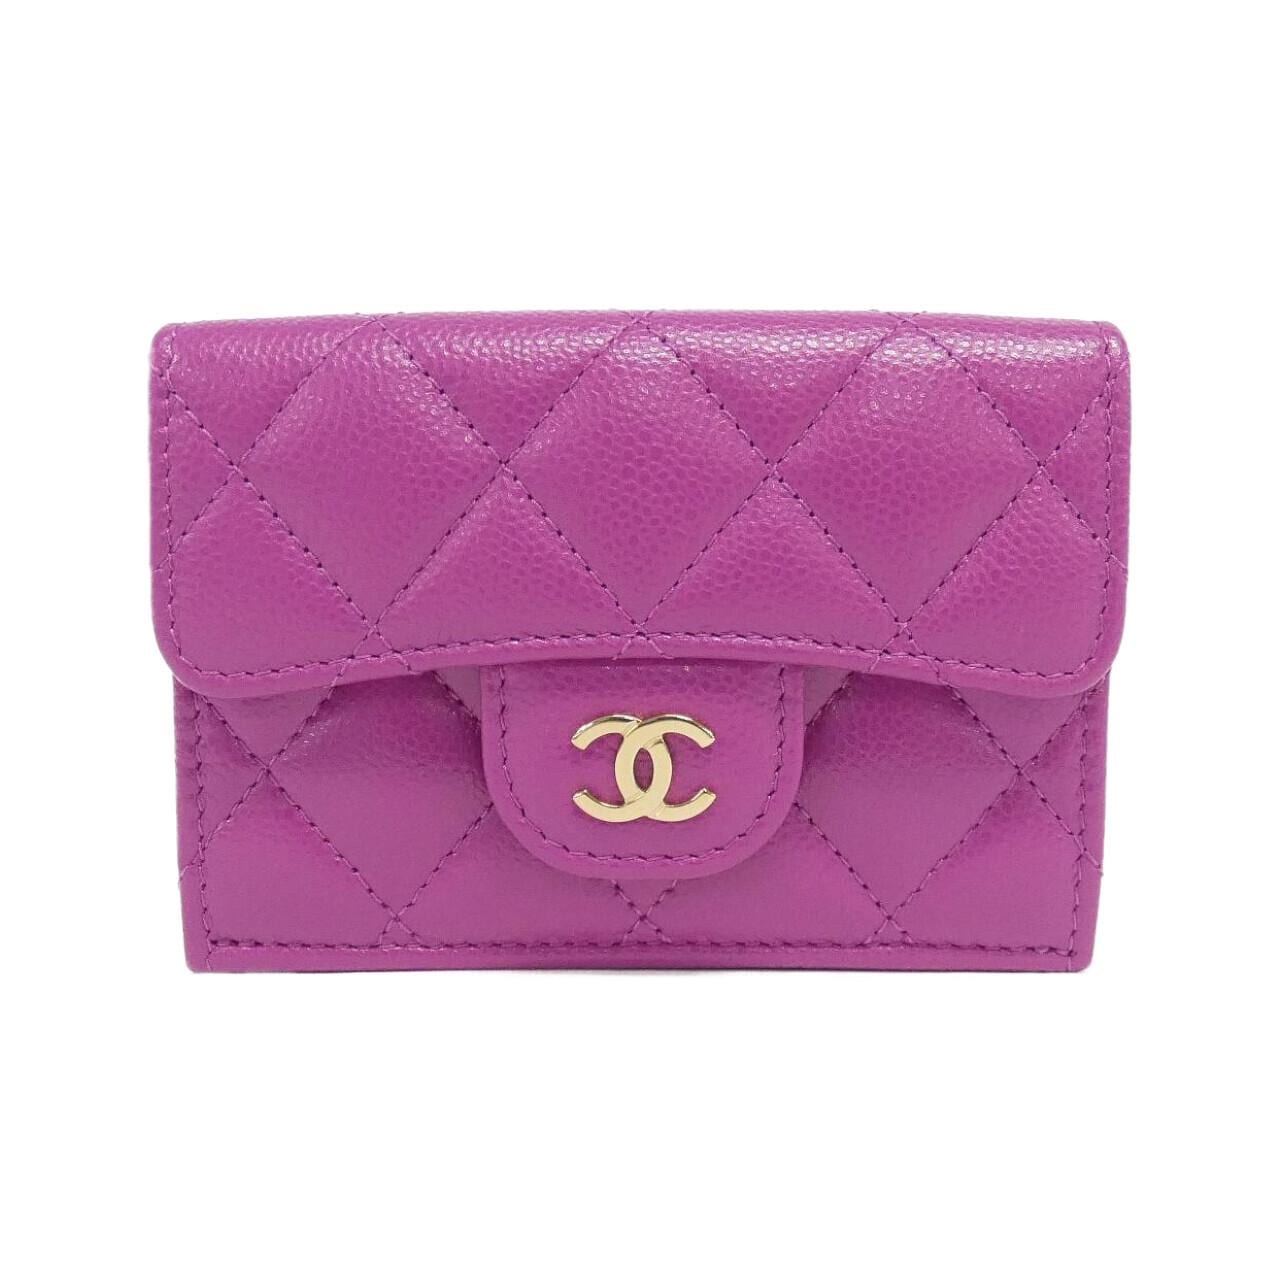 [Unused items] CHANEL Timeless Classic Line AP0230 Wallet